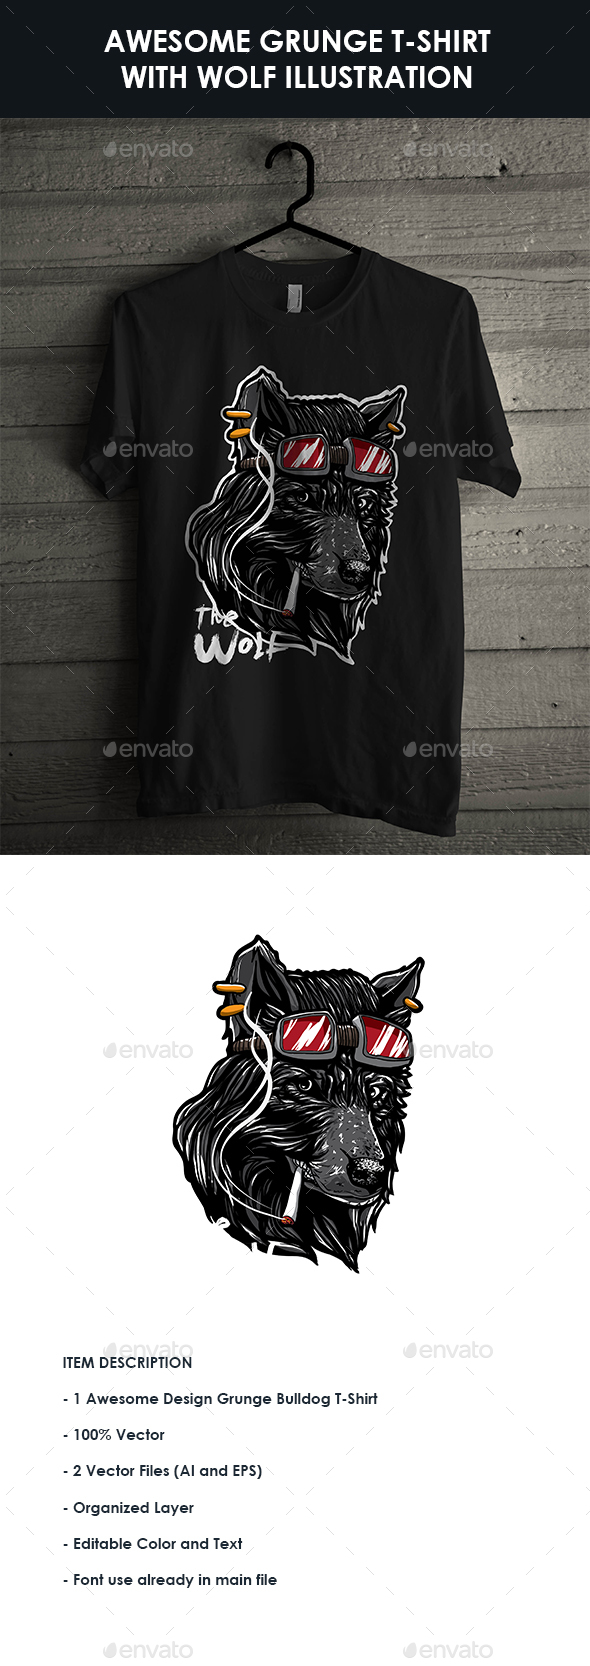 GraphicRiver Awesome Design Grunge Animal Themed T-shirt No 4 20551127